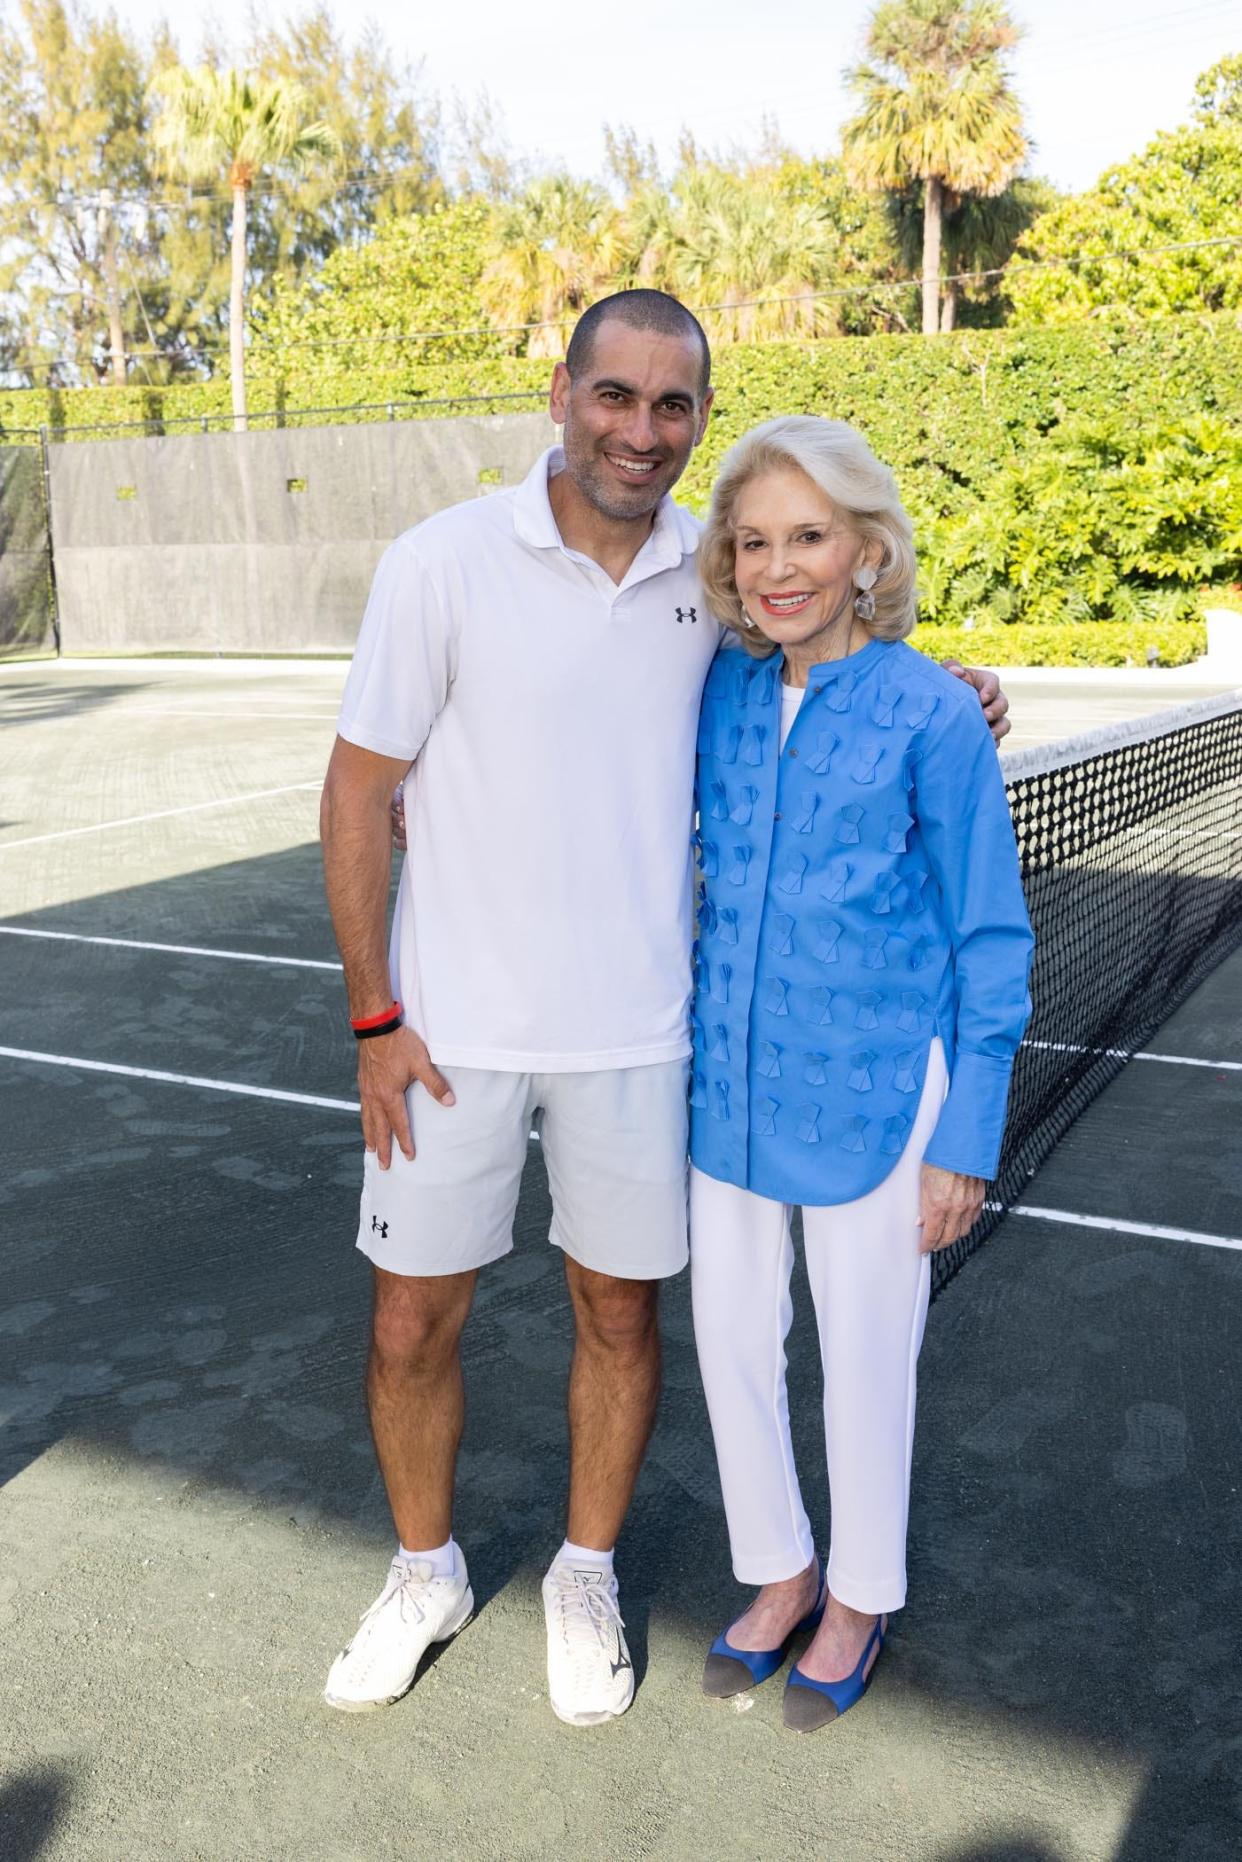 Andy Ram And Nicki Harris at the Israel Tennis Education Center's Palm Beach weekend last March. This year's charity weekend is set for March 29 at a private residence.